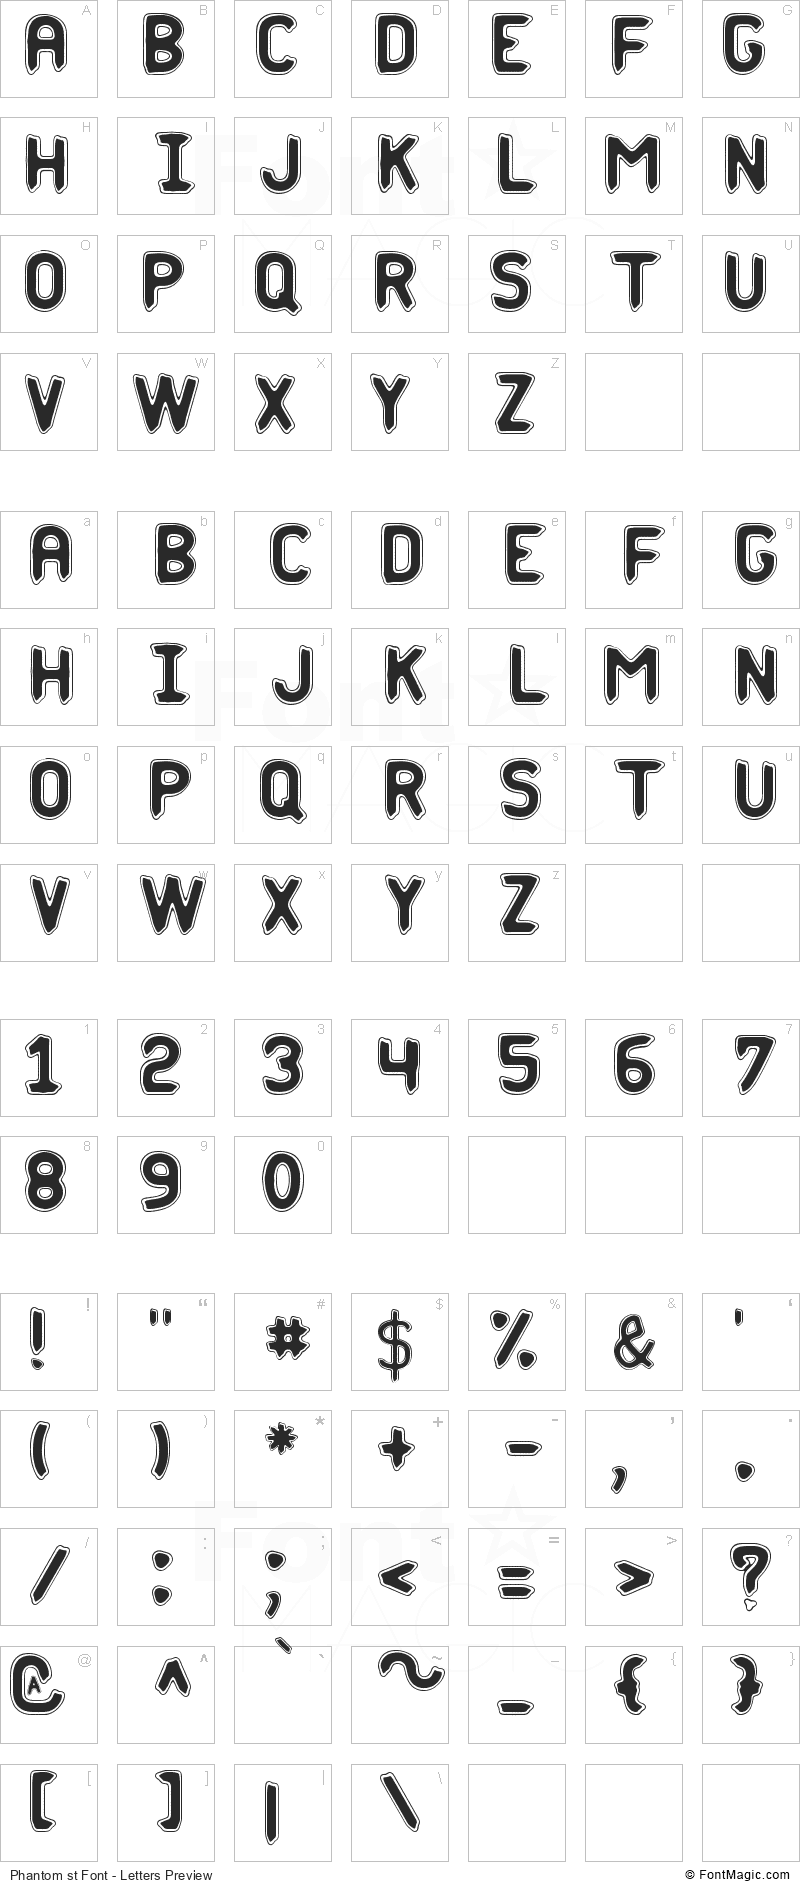 Phantom st Font - All Latters Preview Chart